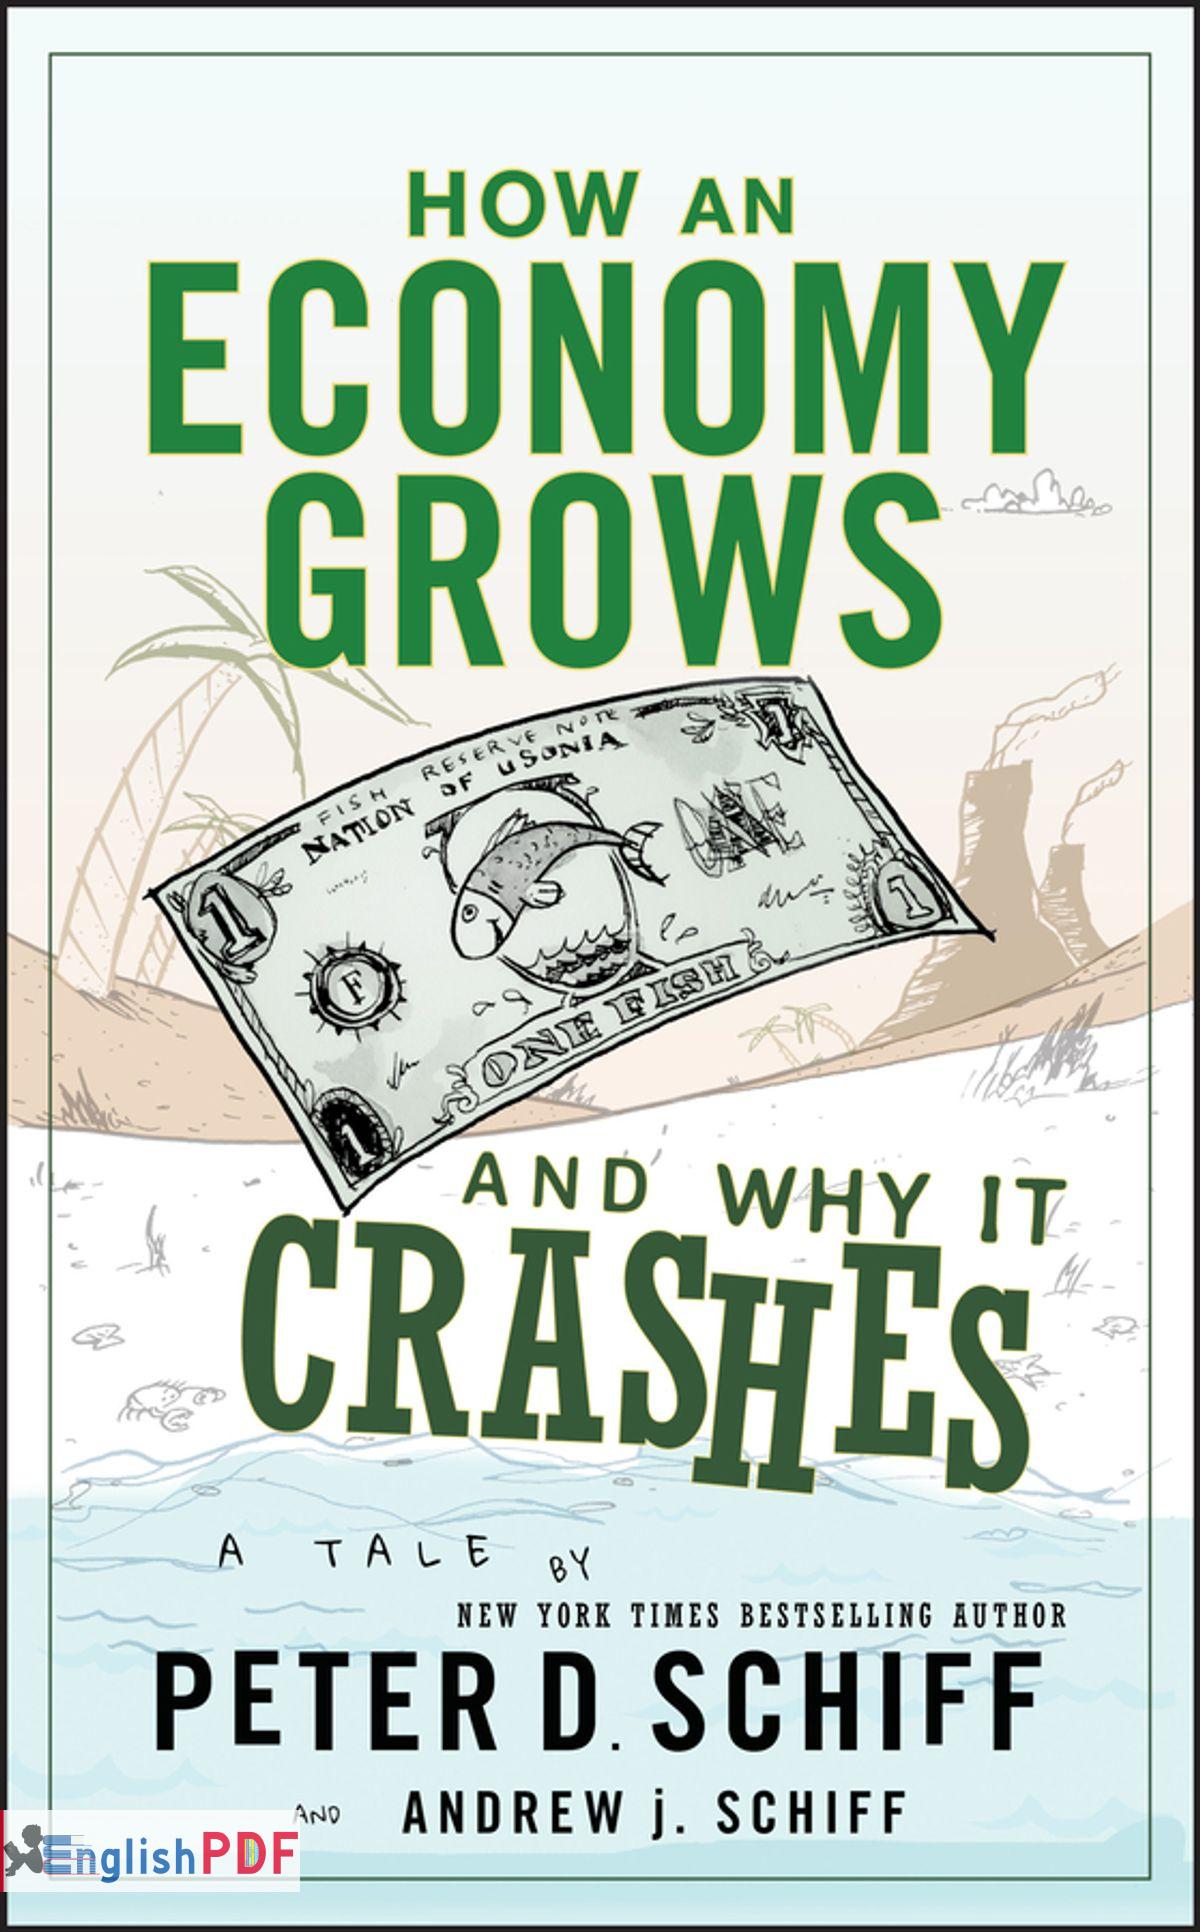 How an Economy Grows and Why It Crashes PDF EnglishPDF